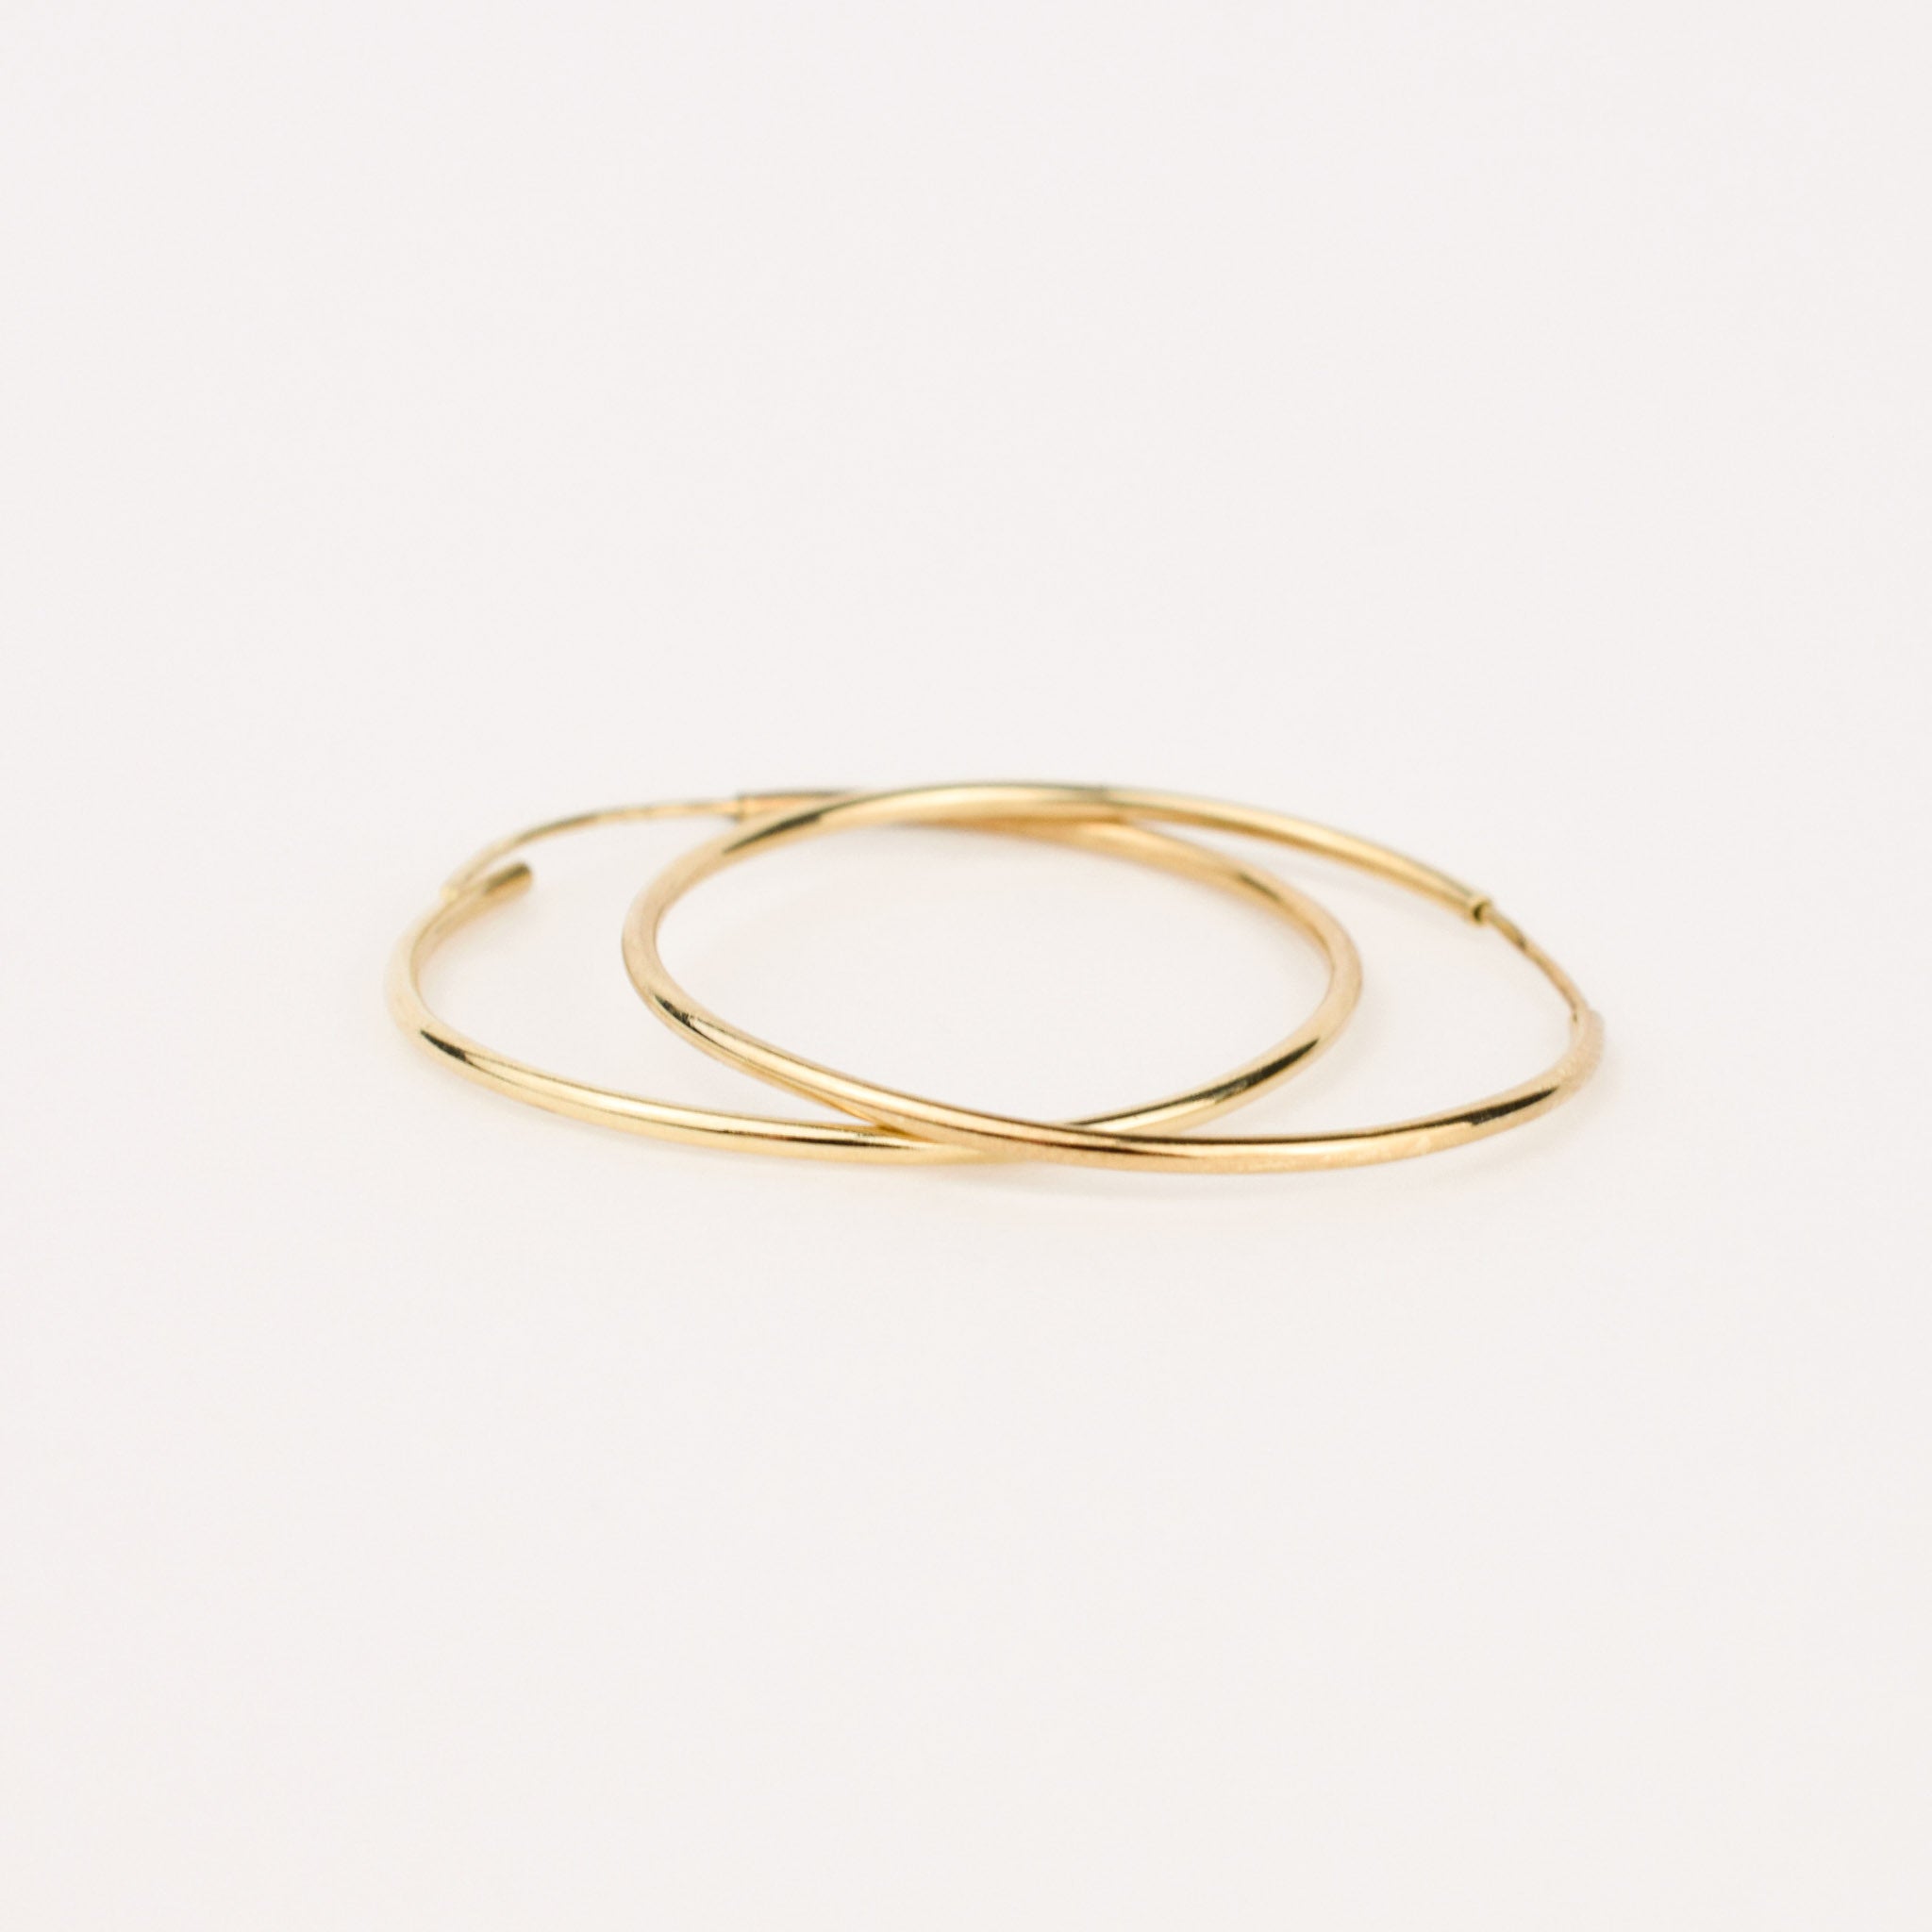 Large Thin Gold hoops 